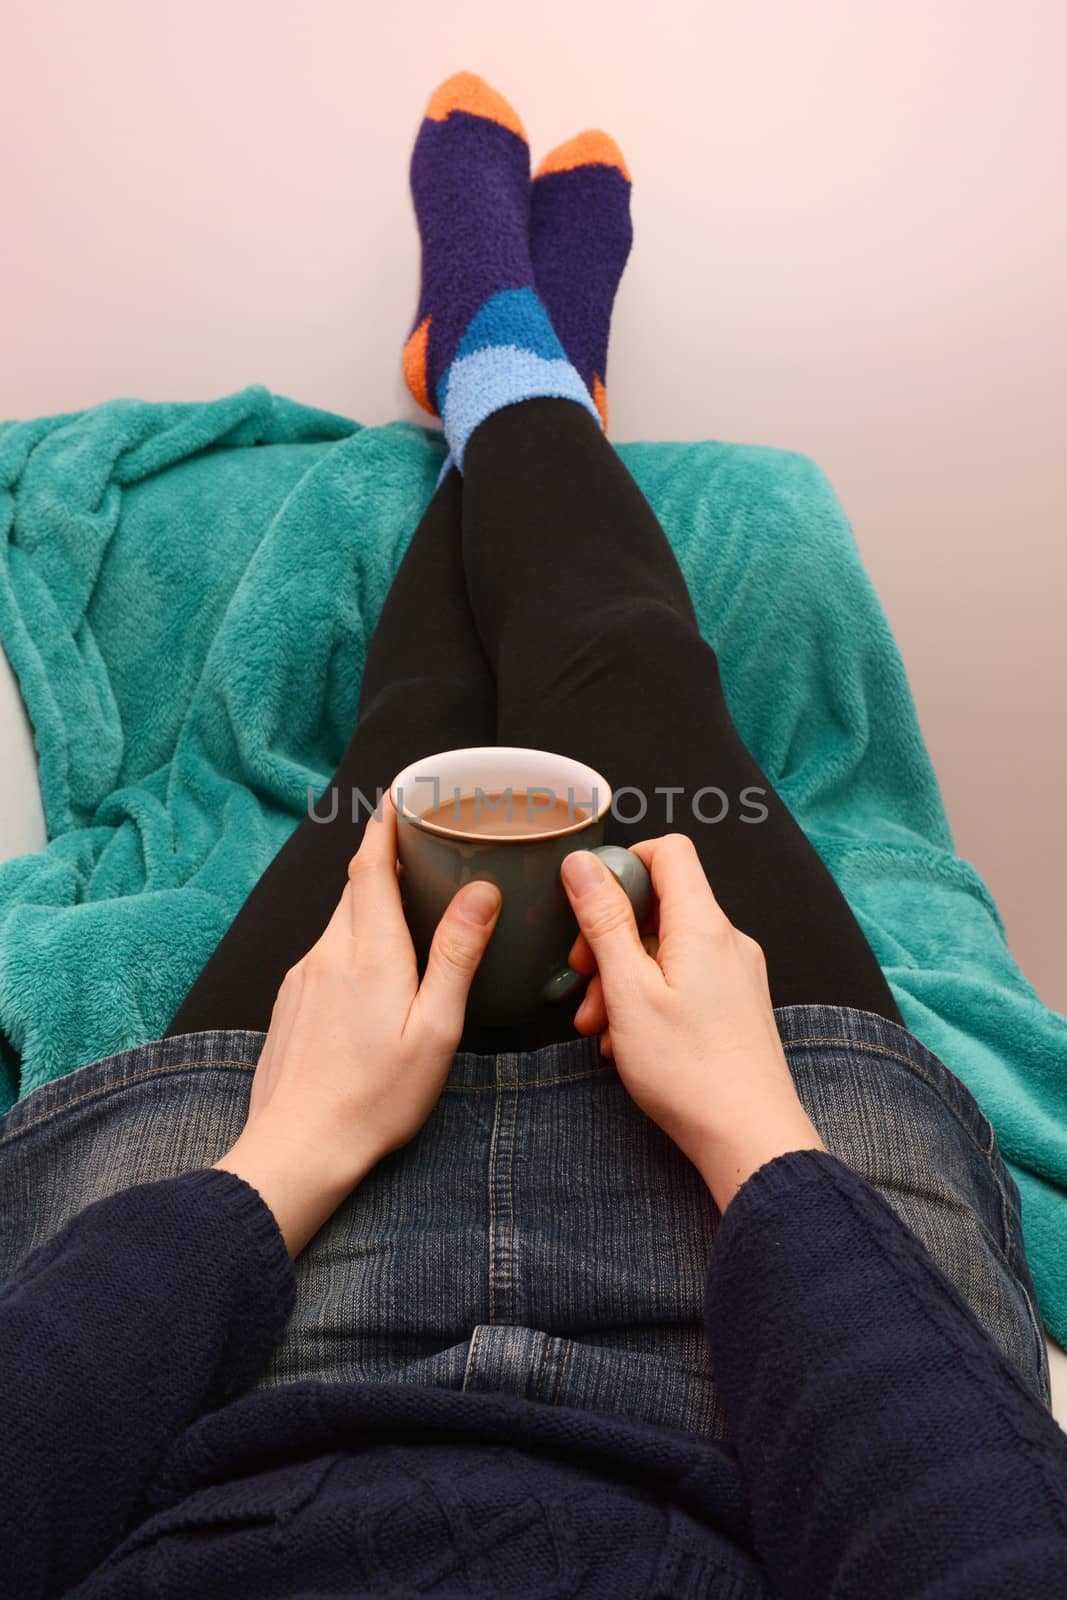 Woman holding a cup of coffee or tea, relaxing on the couch with her feet up